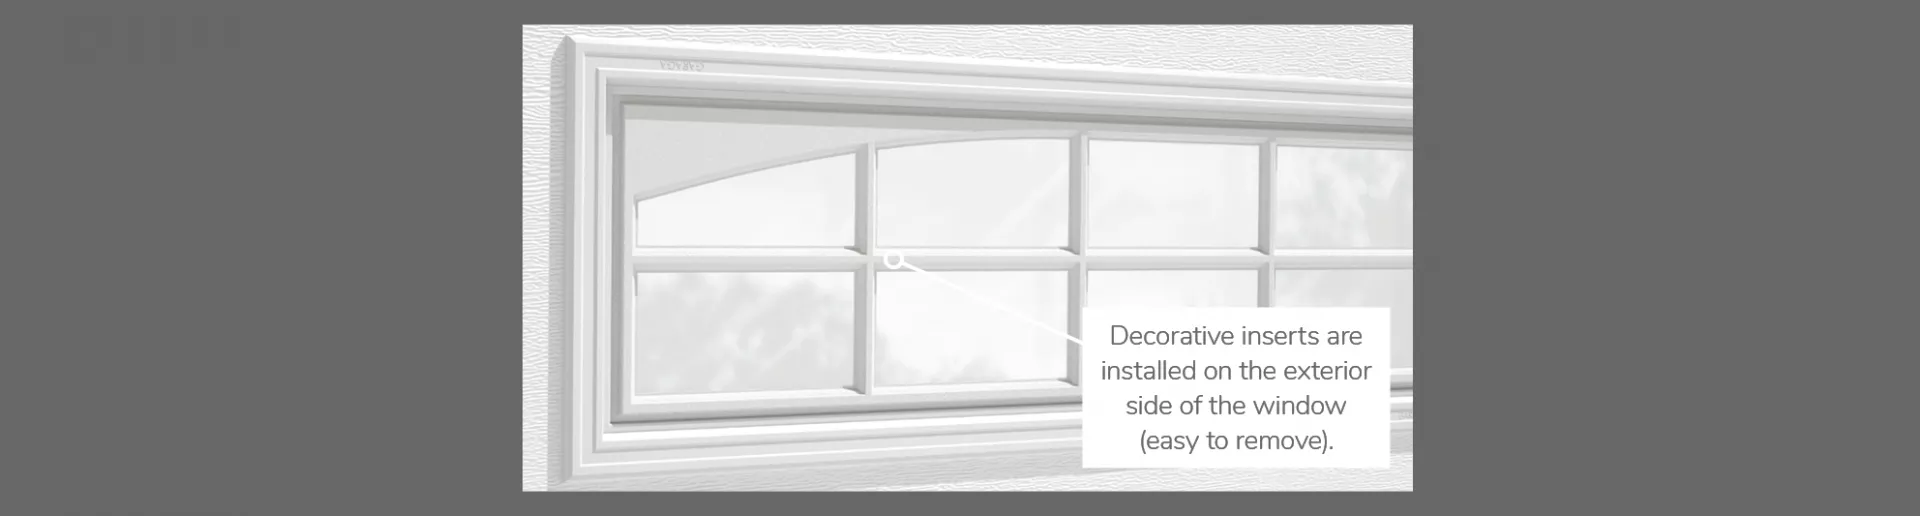 Double Stockton Arch Decorative Insert, 40" x 13"or 41" x 16", available for door R-16, 3 layers - Polystyrene,  2 layers - Polystyrene and Non-insulated